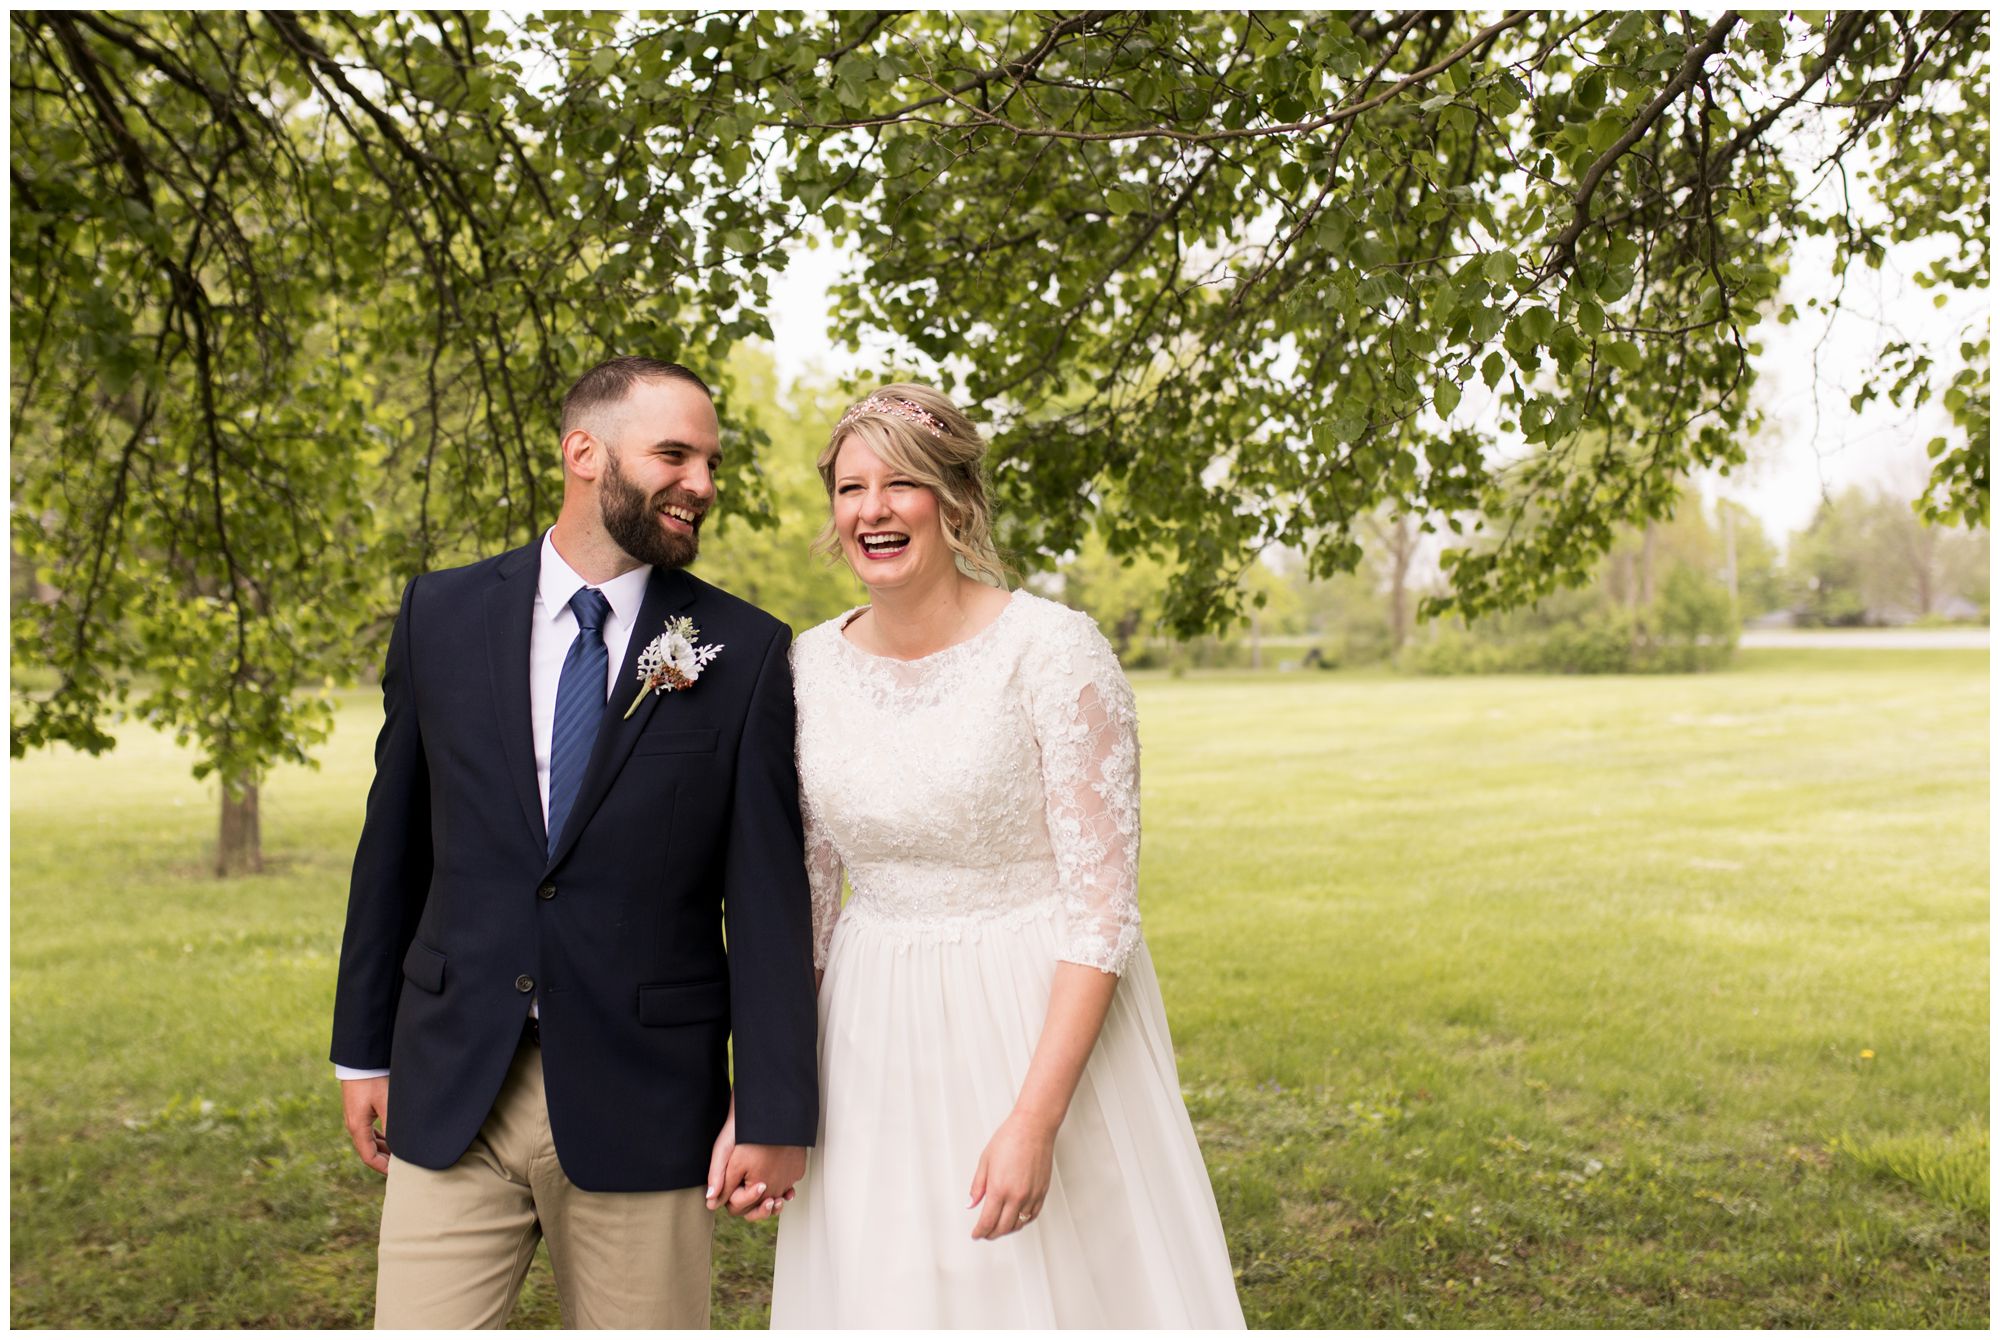 bride and groom walk and laugh together during portraits after wedding ceremony in Muncie Indiana